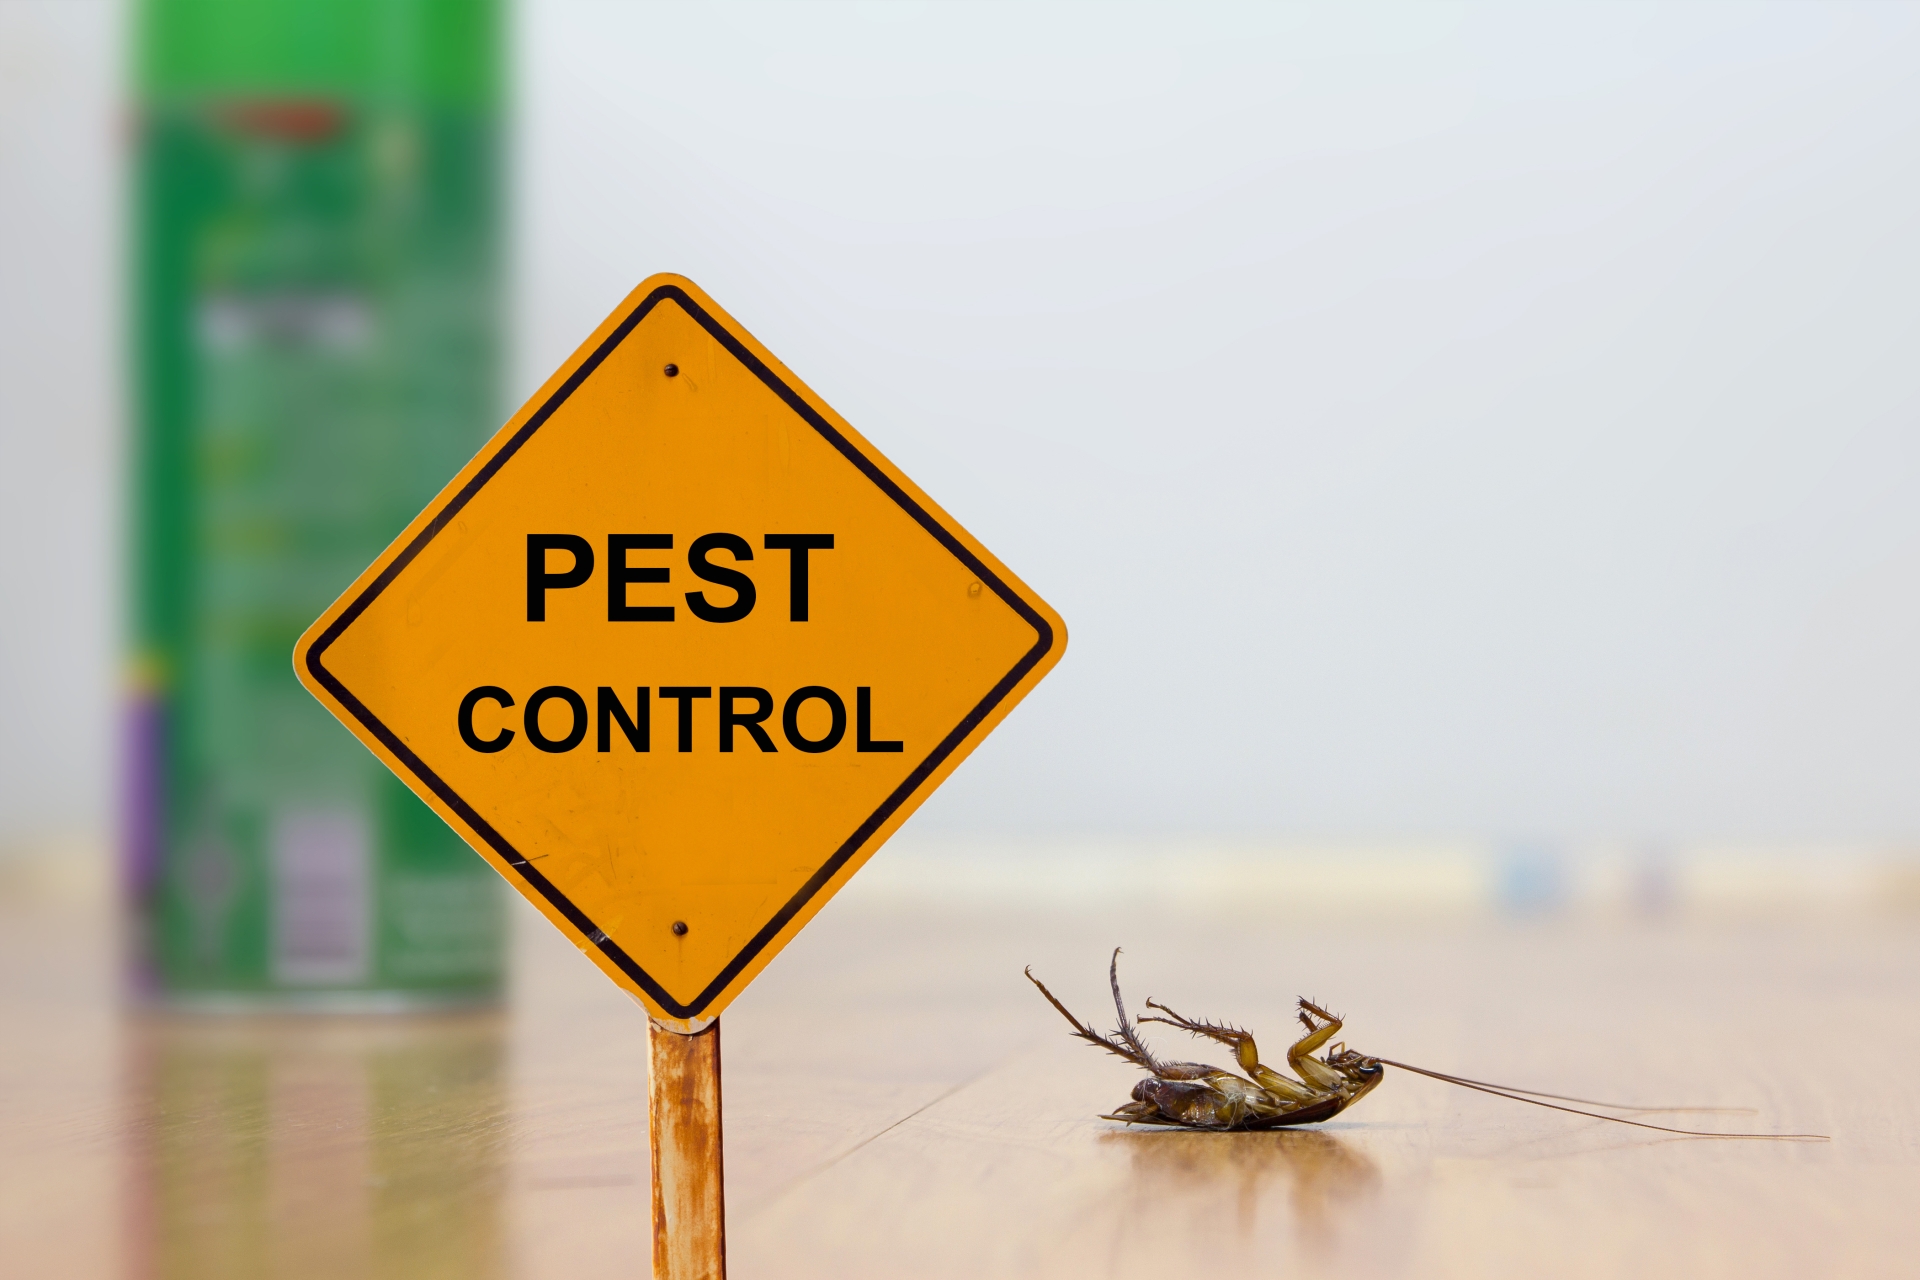 24 Hour Pest Control, Pest Control in West Brompton, World's End, SW10. Call Now 020 8166 9746